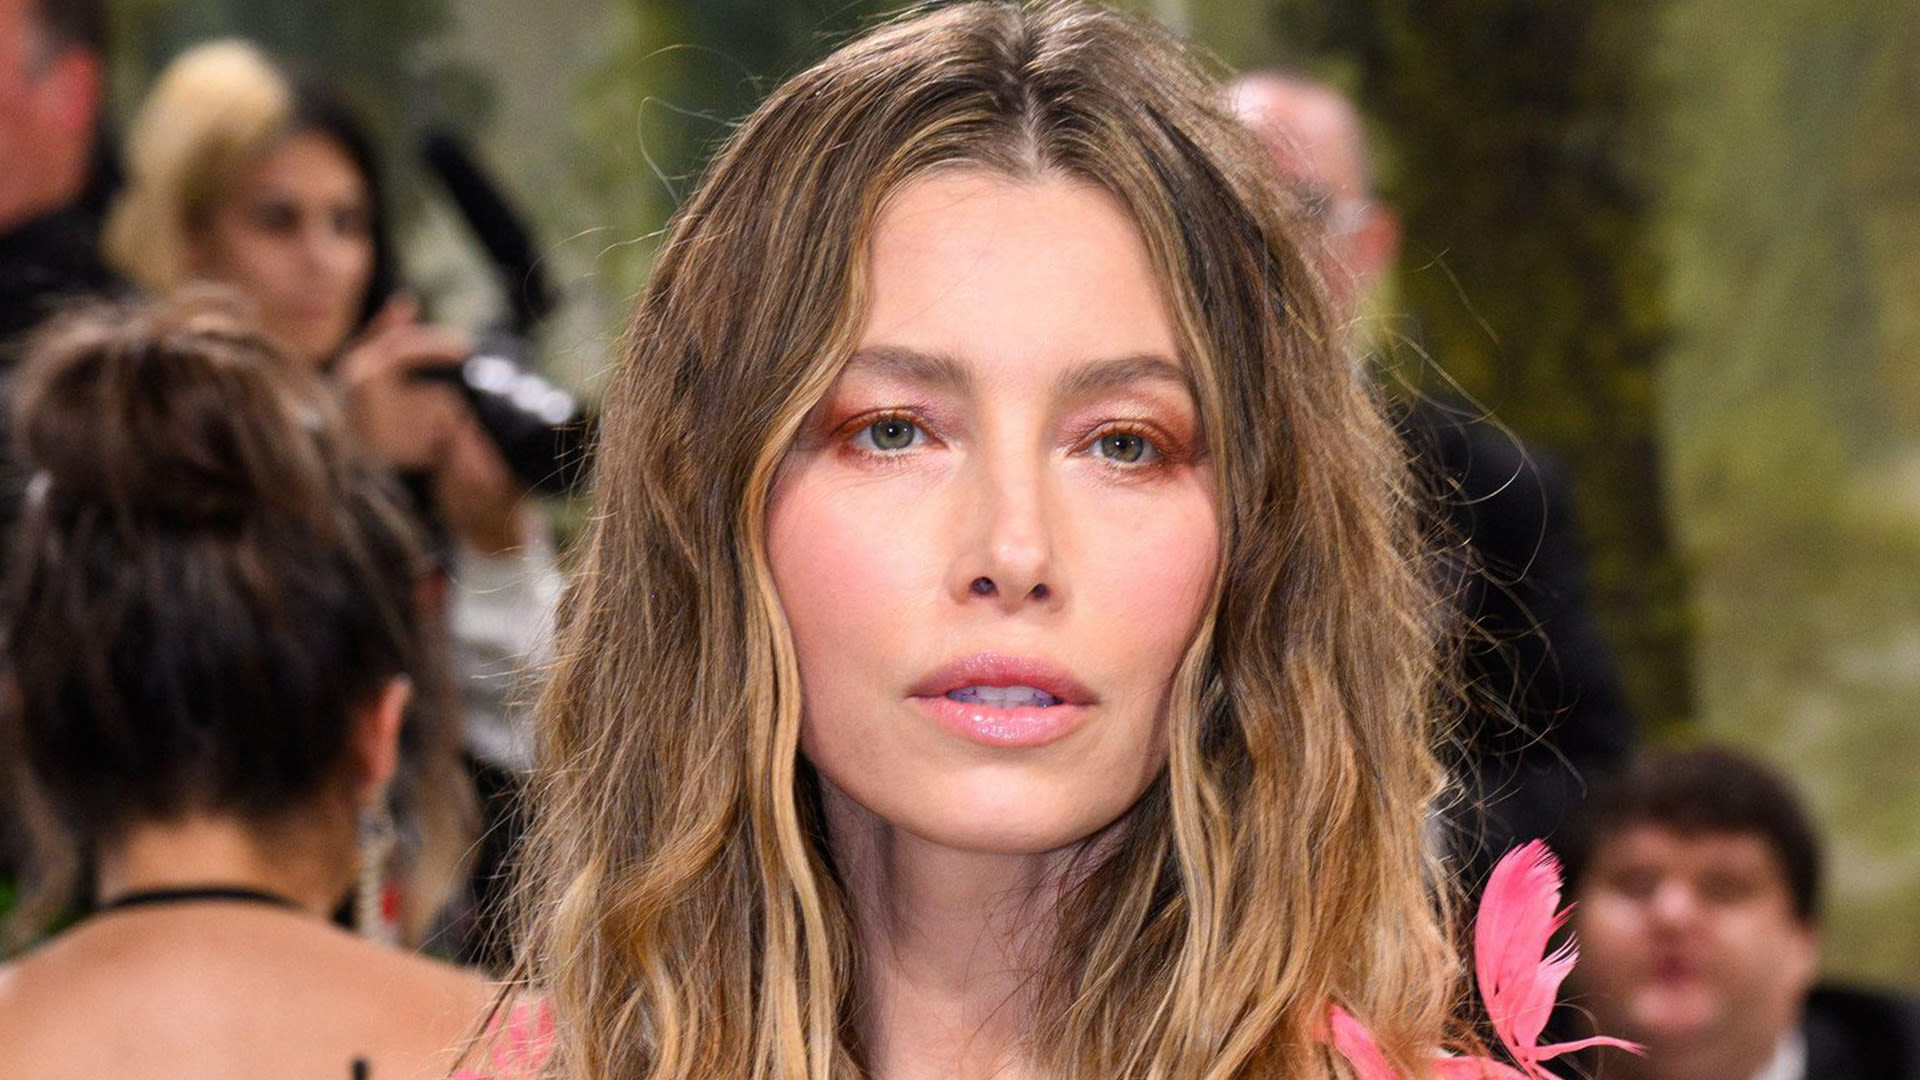 Jessica Biel concerns fans as actress admits spending Mother's Day 'alone'